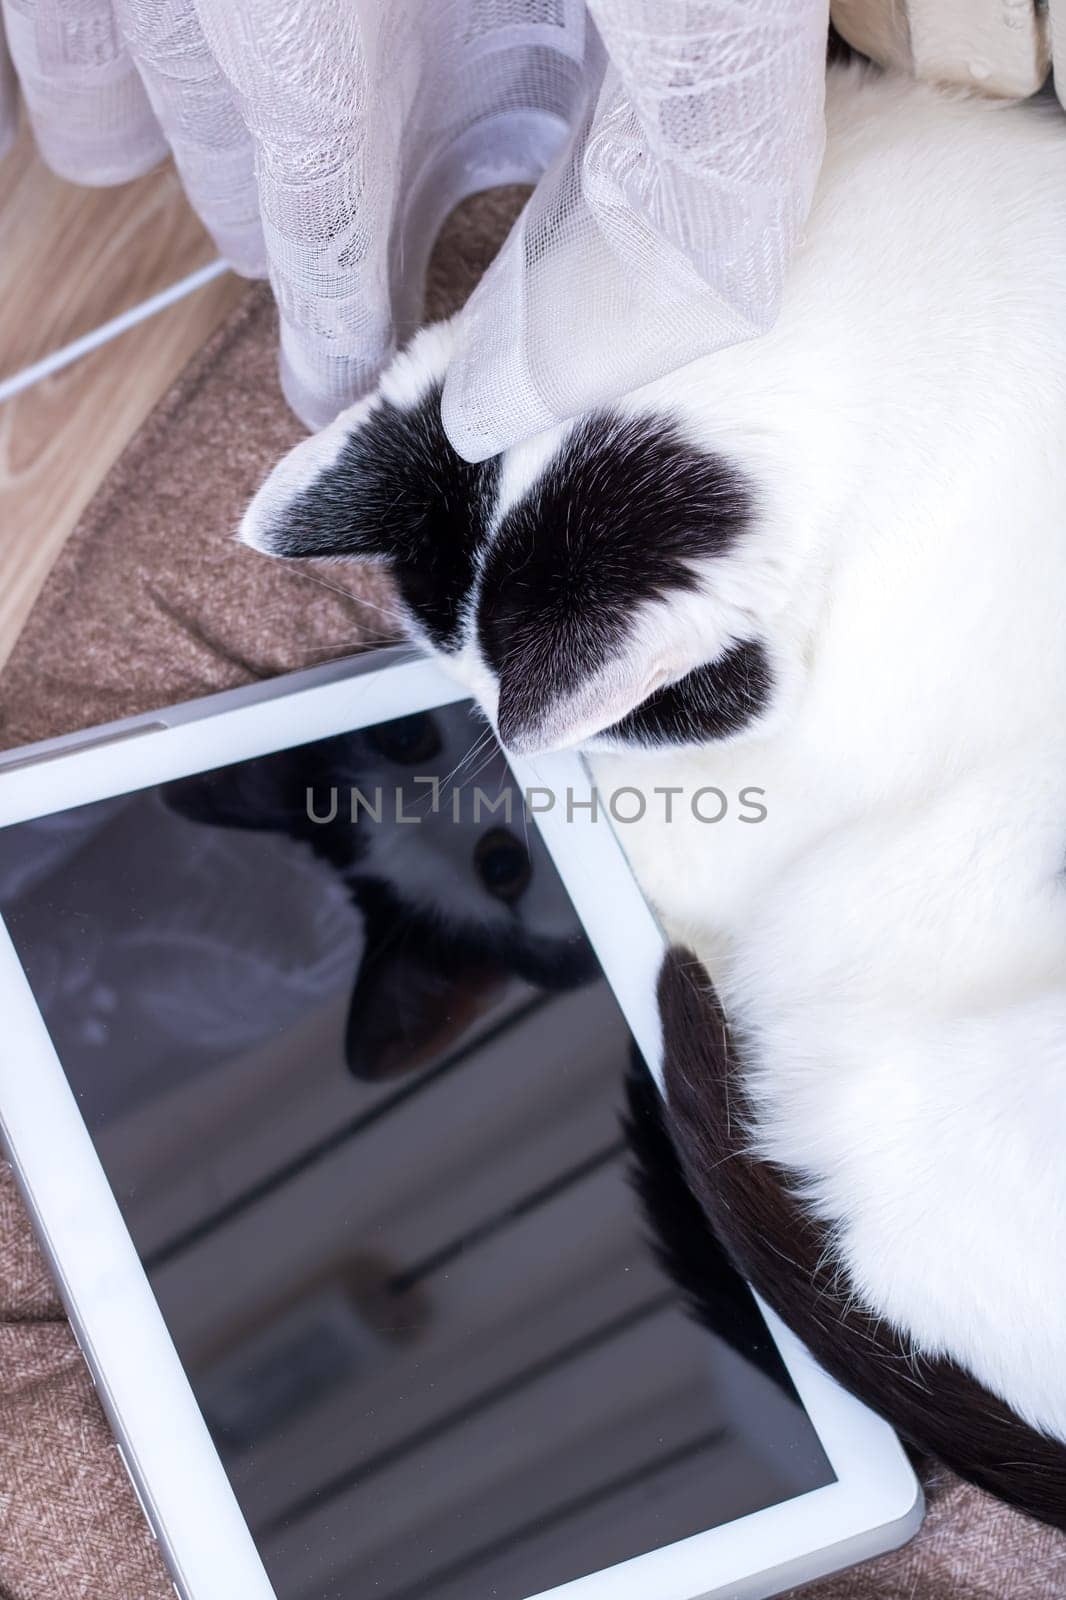 A white cat looking at a tablet screen by Vera1703